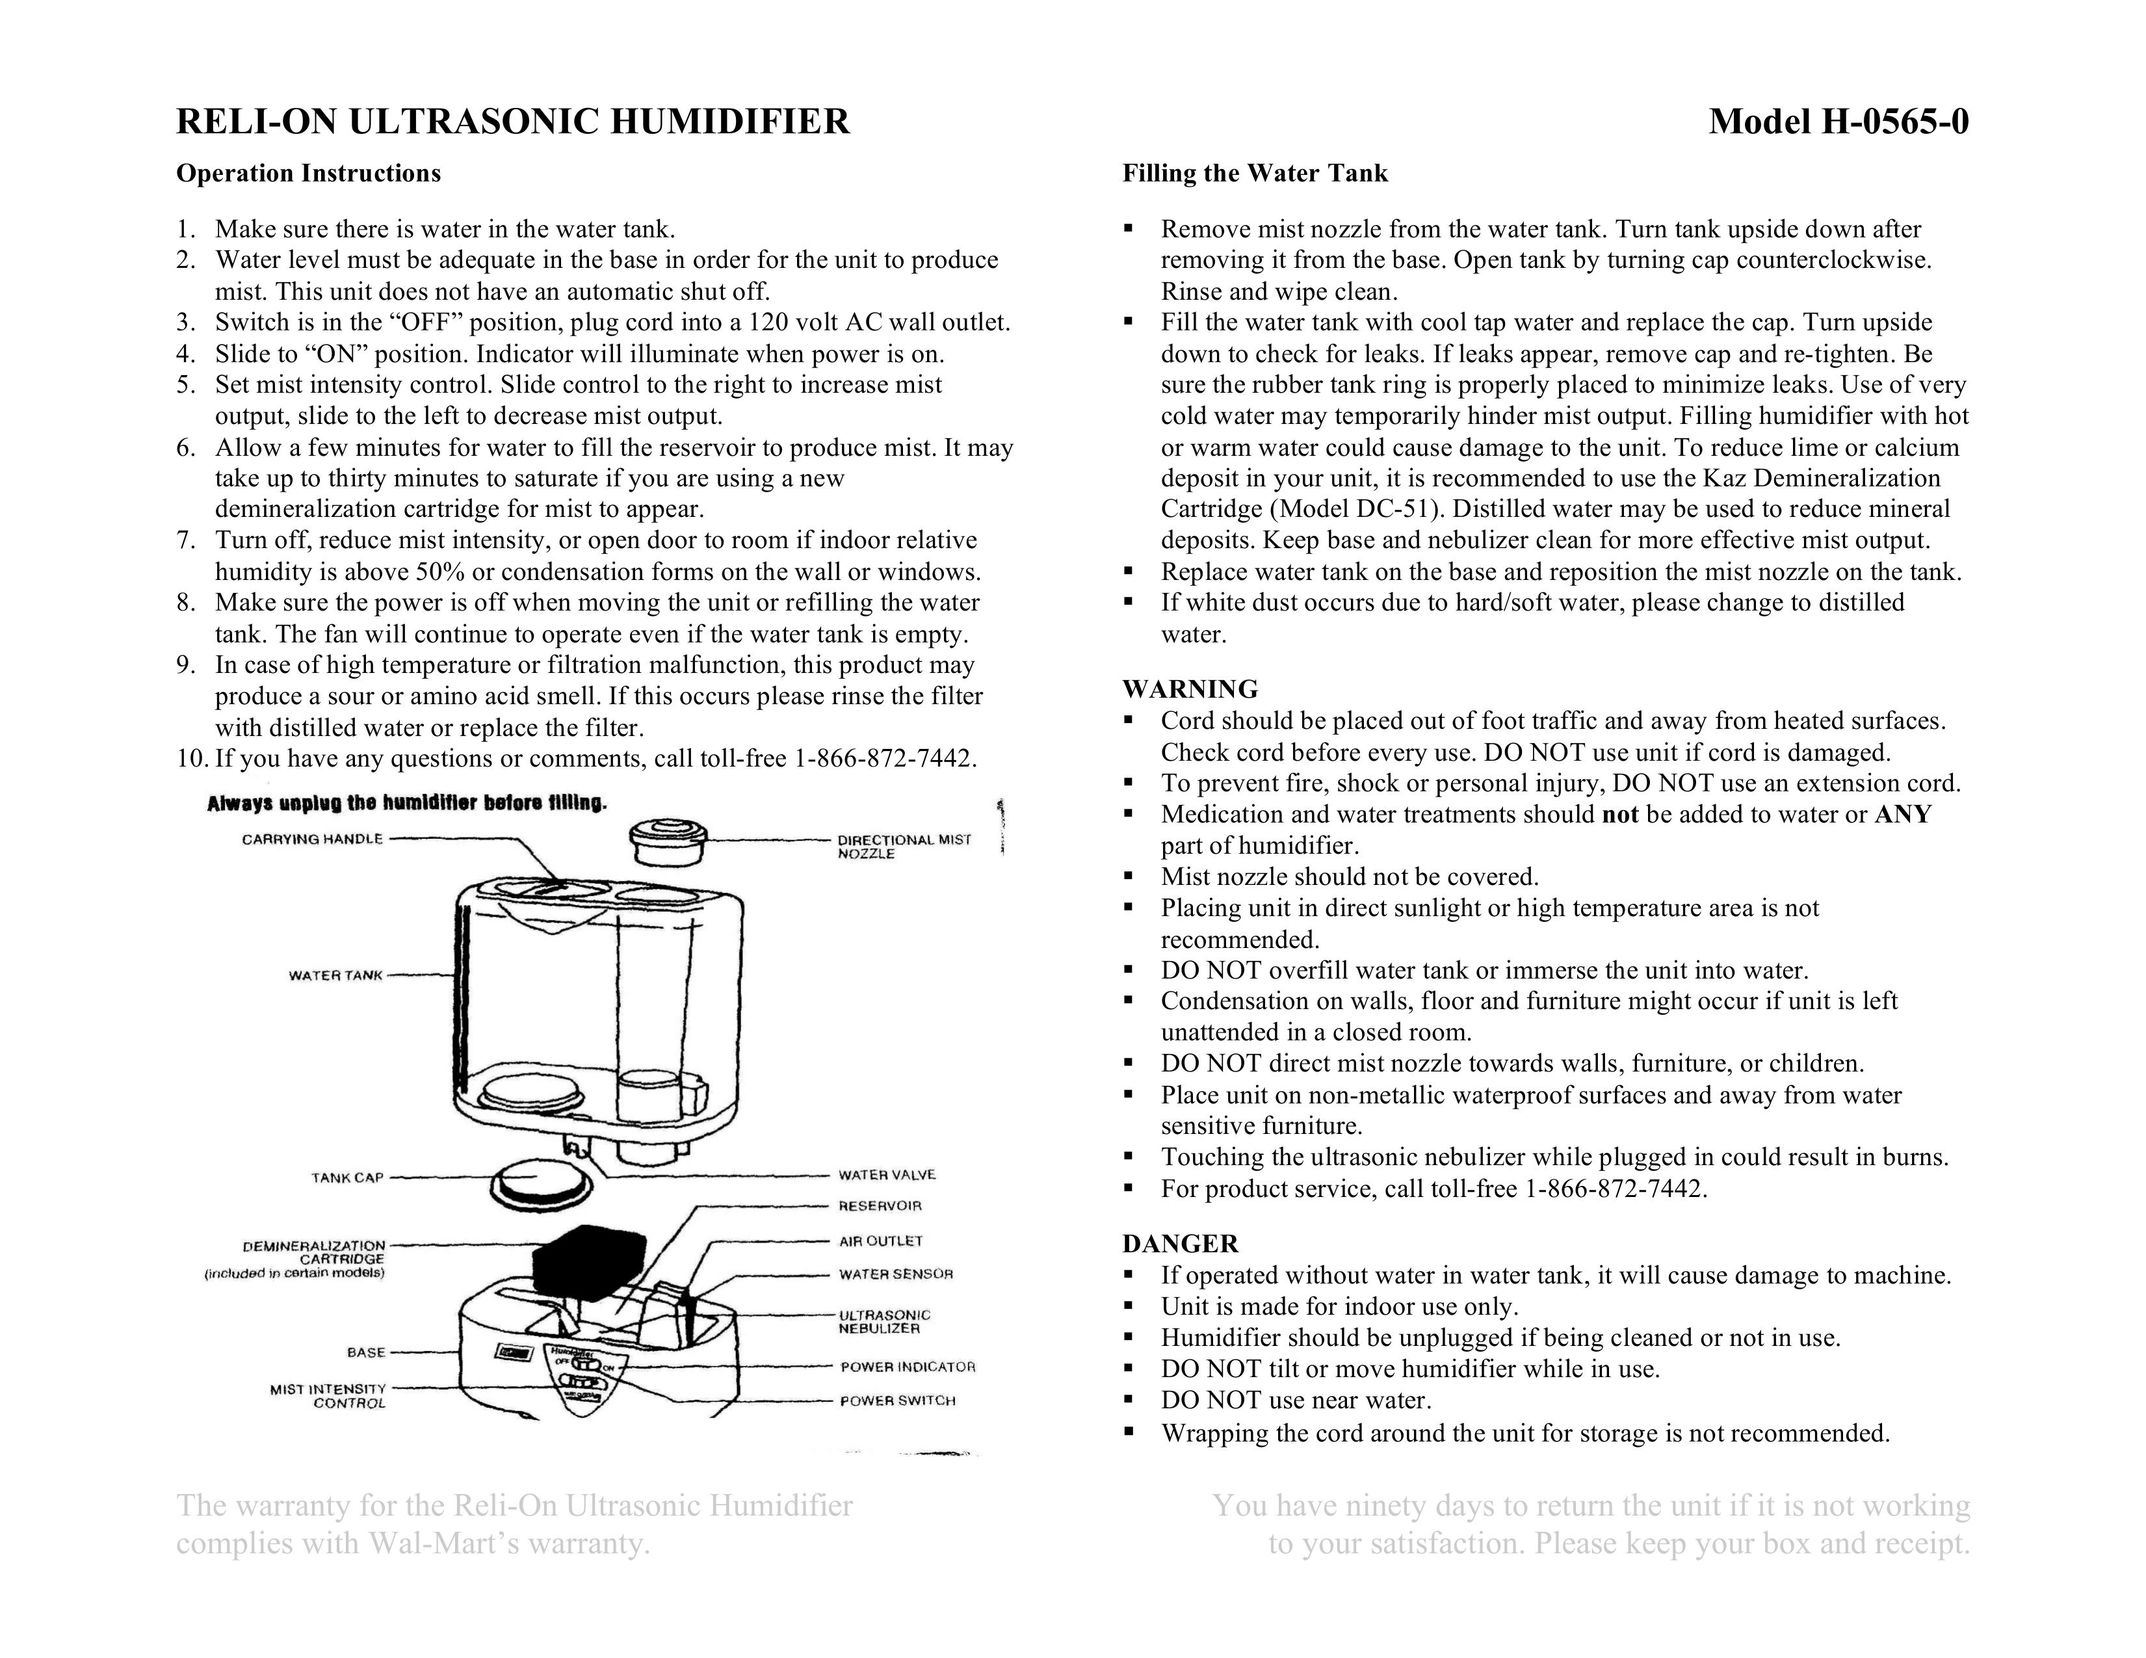 ReliOn Model H-0565-0 Humidifier User Manual